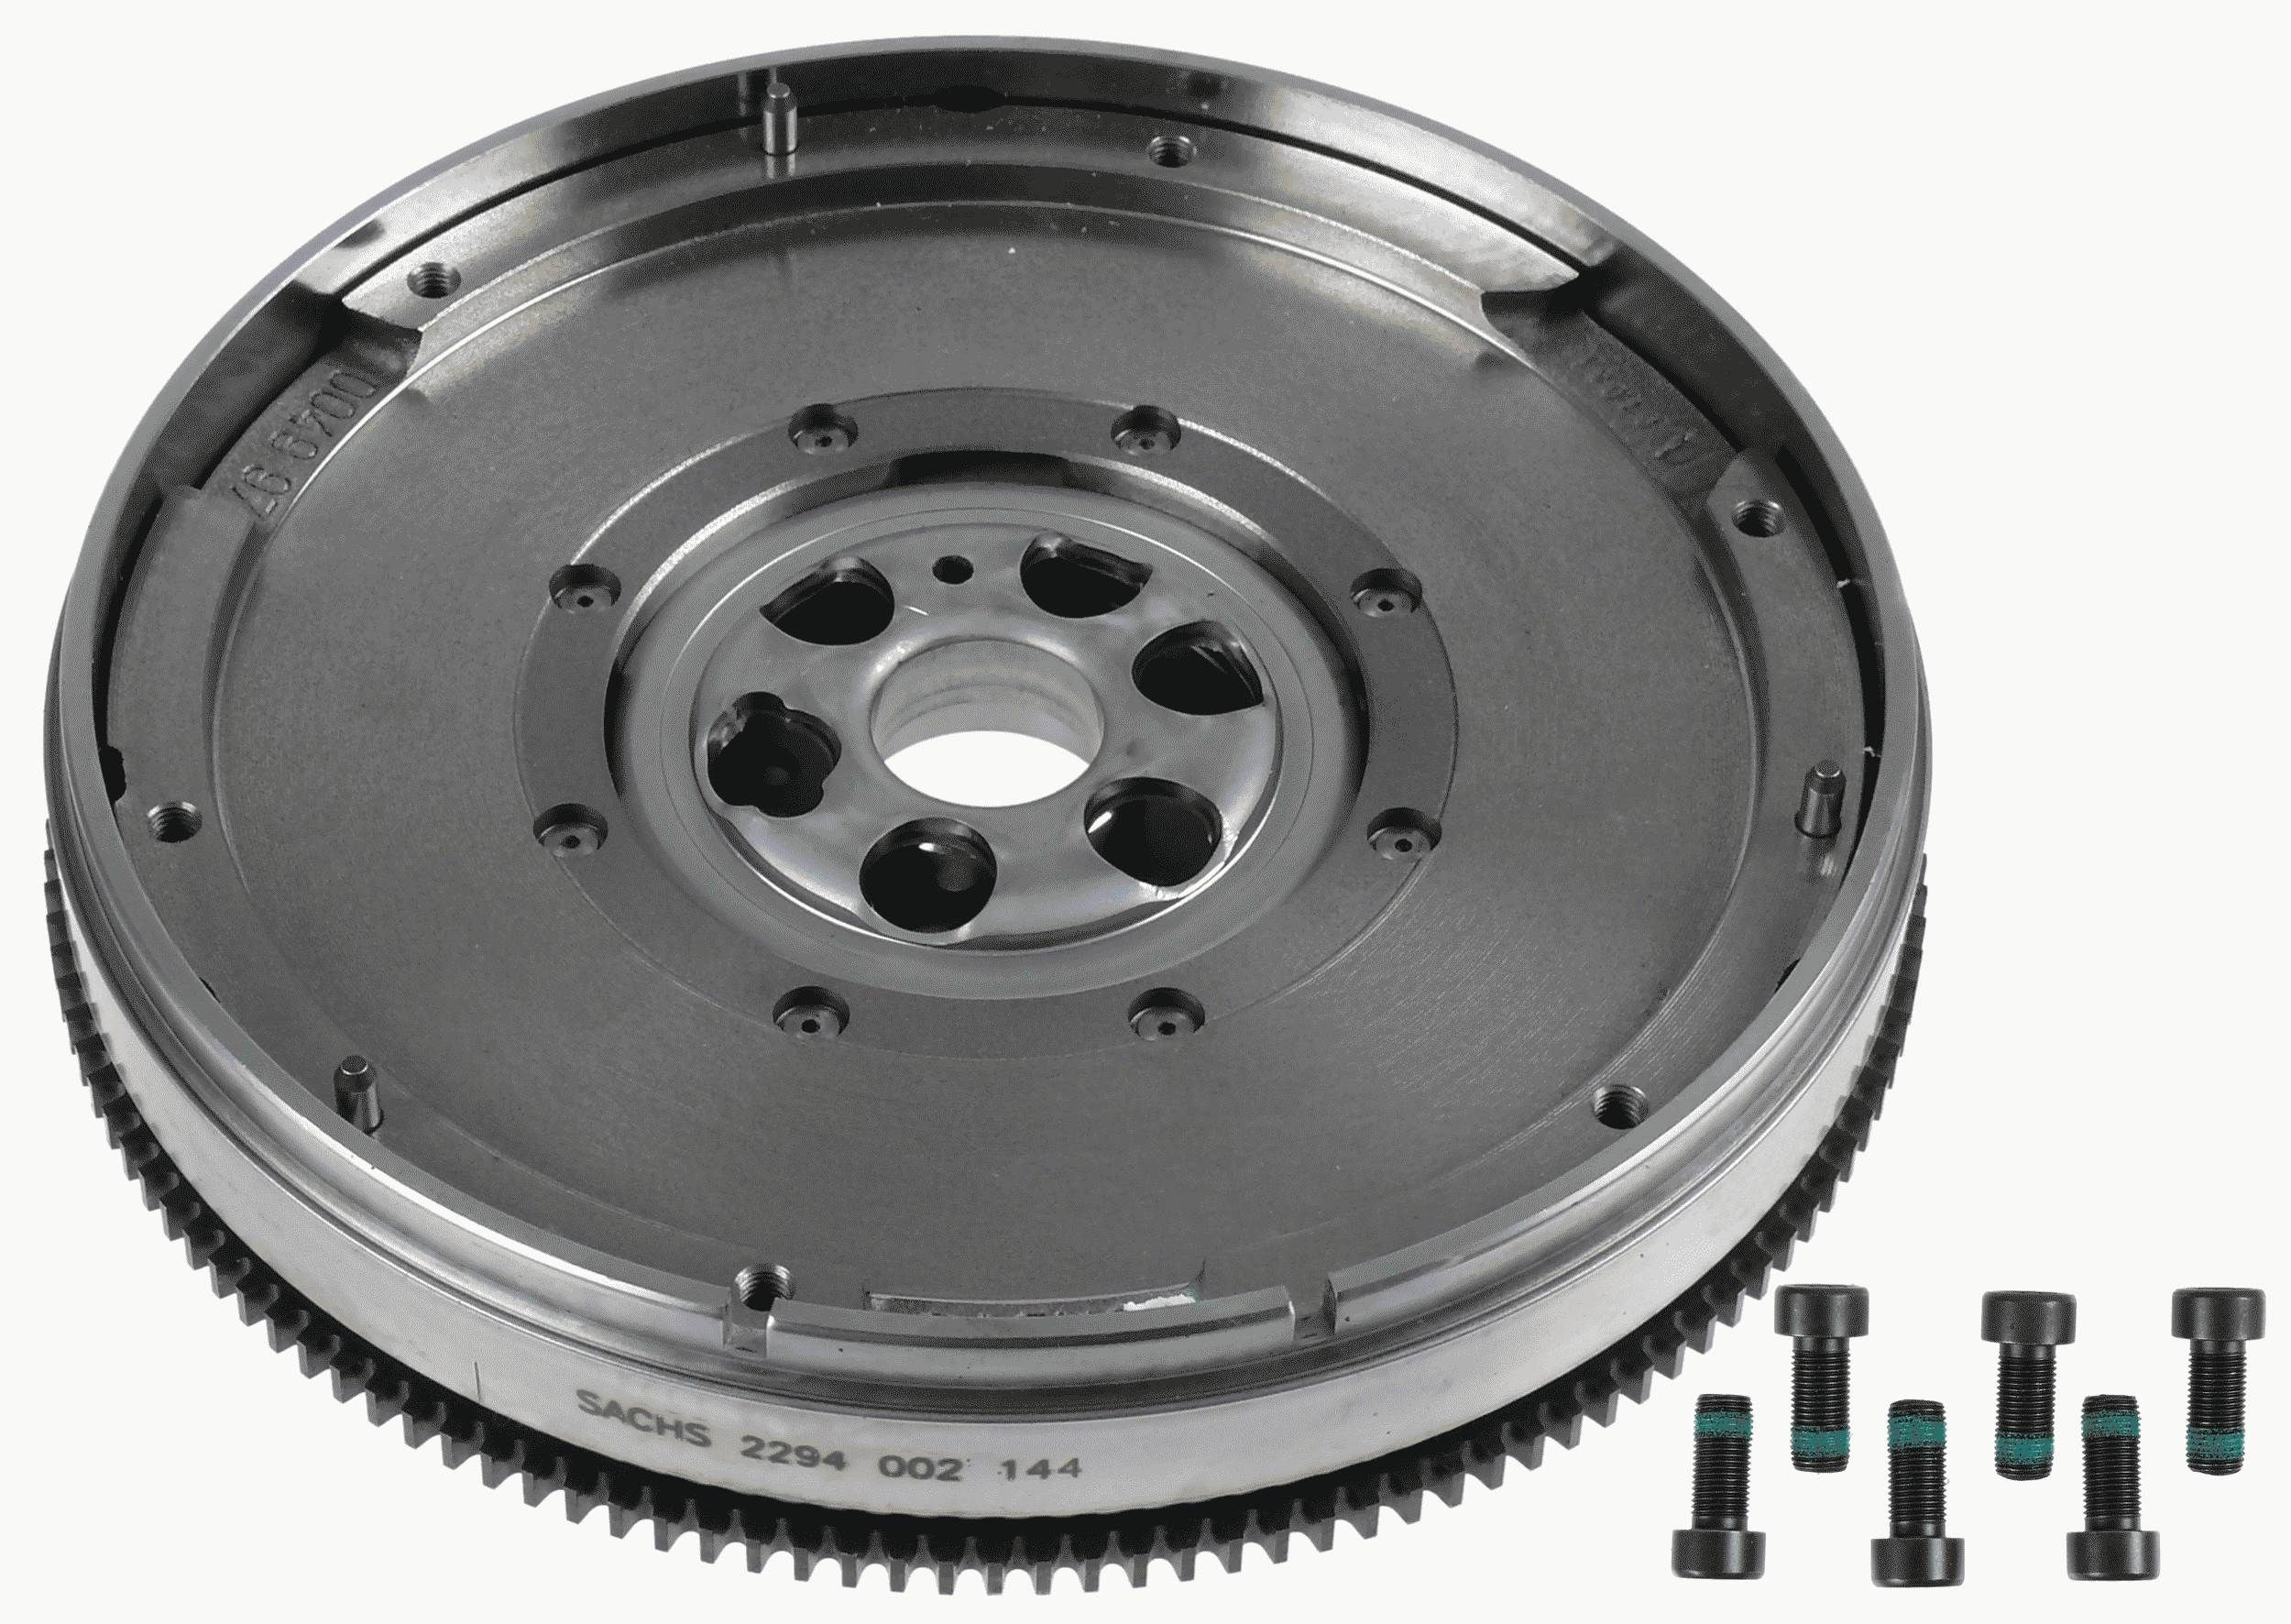 Great value for money - SACHS Dual mass flywheel 2294 002 144